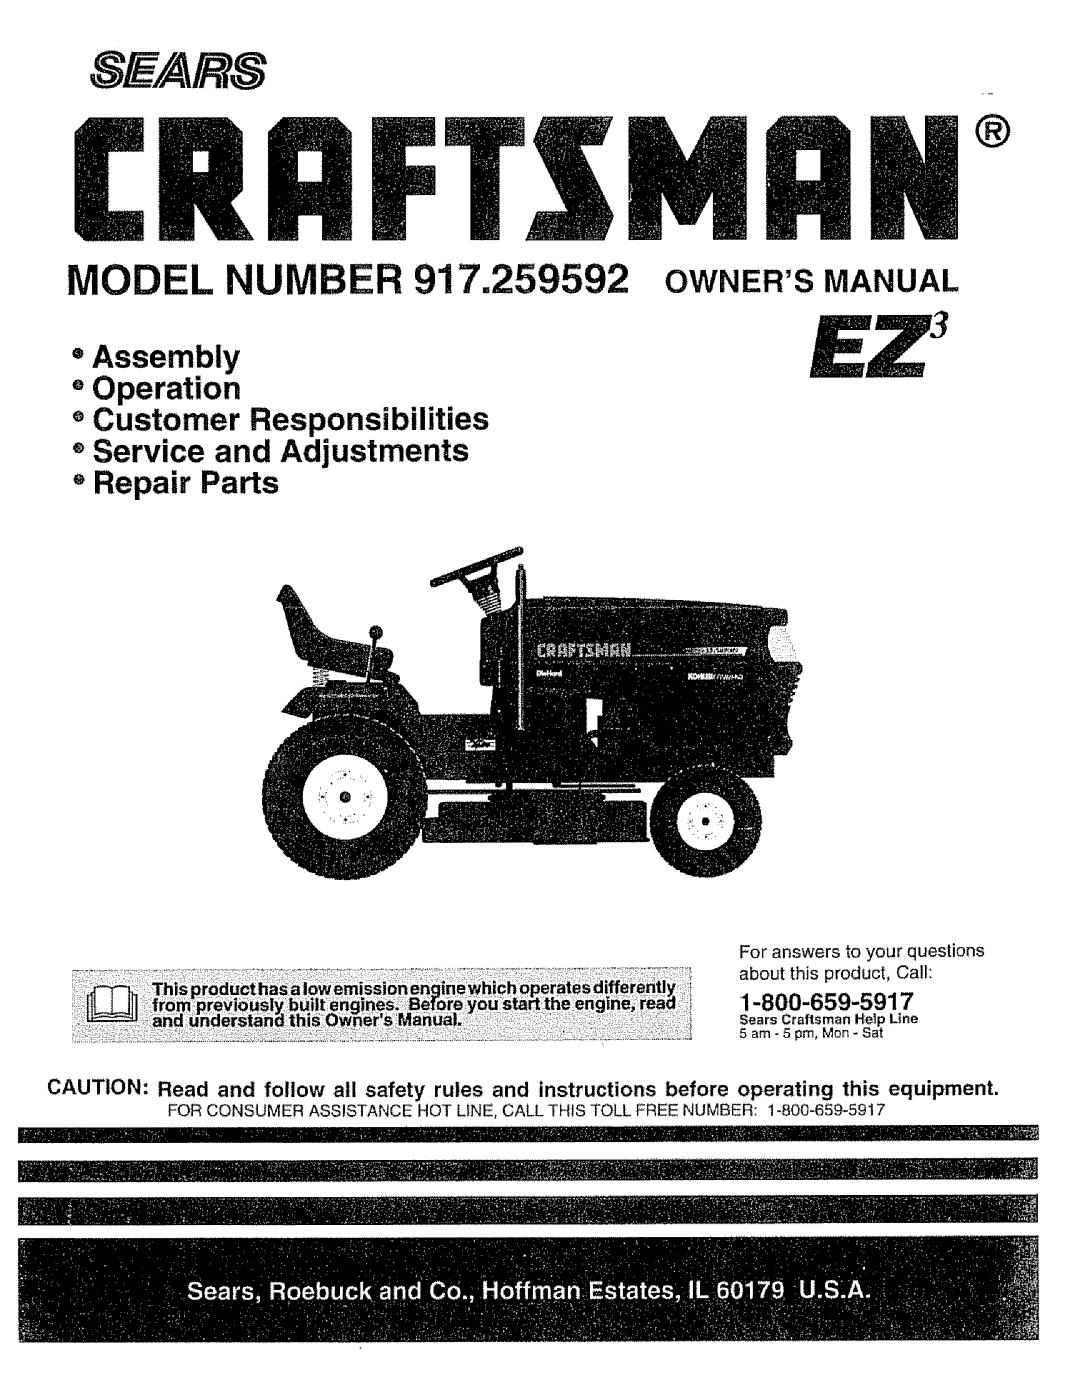 Craftsman owner manual MODEL NUMBER 917.259592 OWNERS MANUAL, =Assembly + Operation, +Repair Parts, 1-800-659-5917 